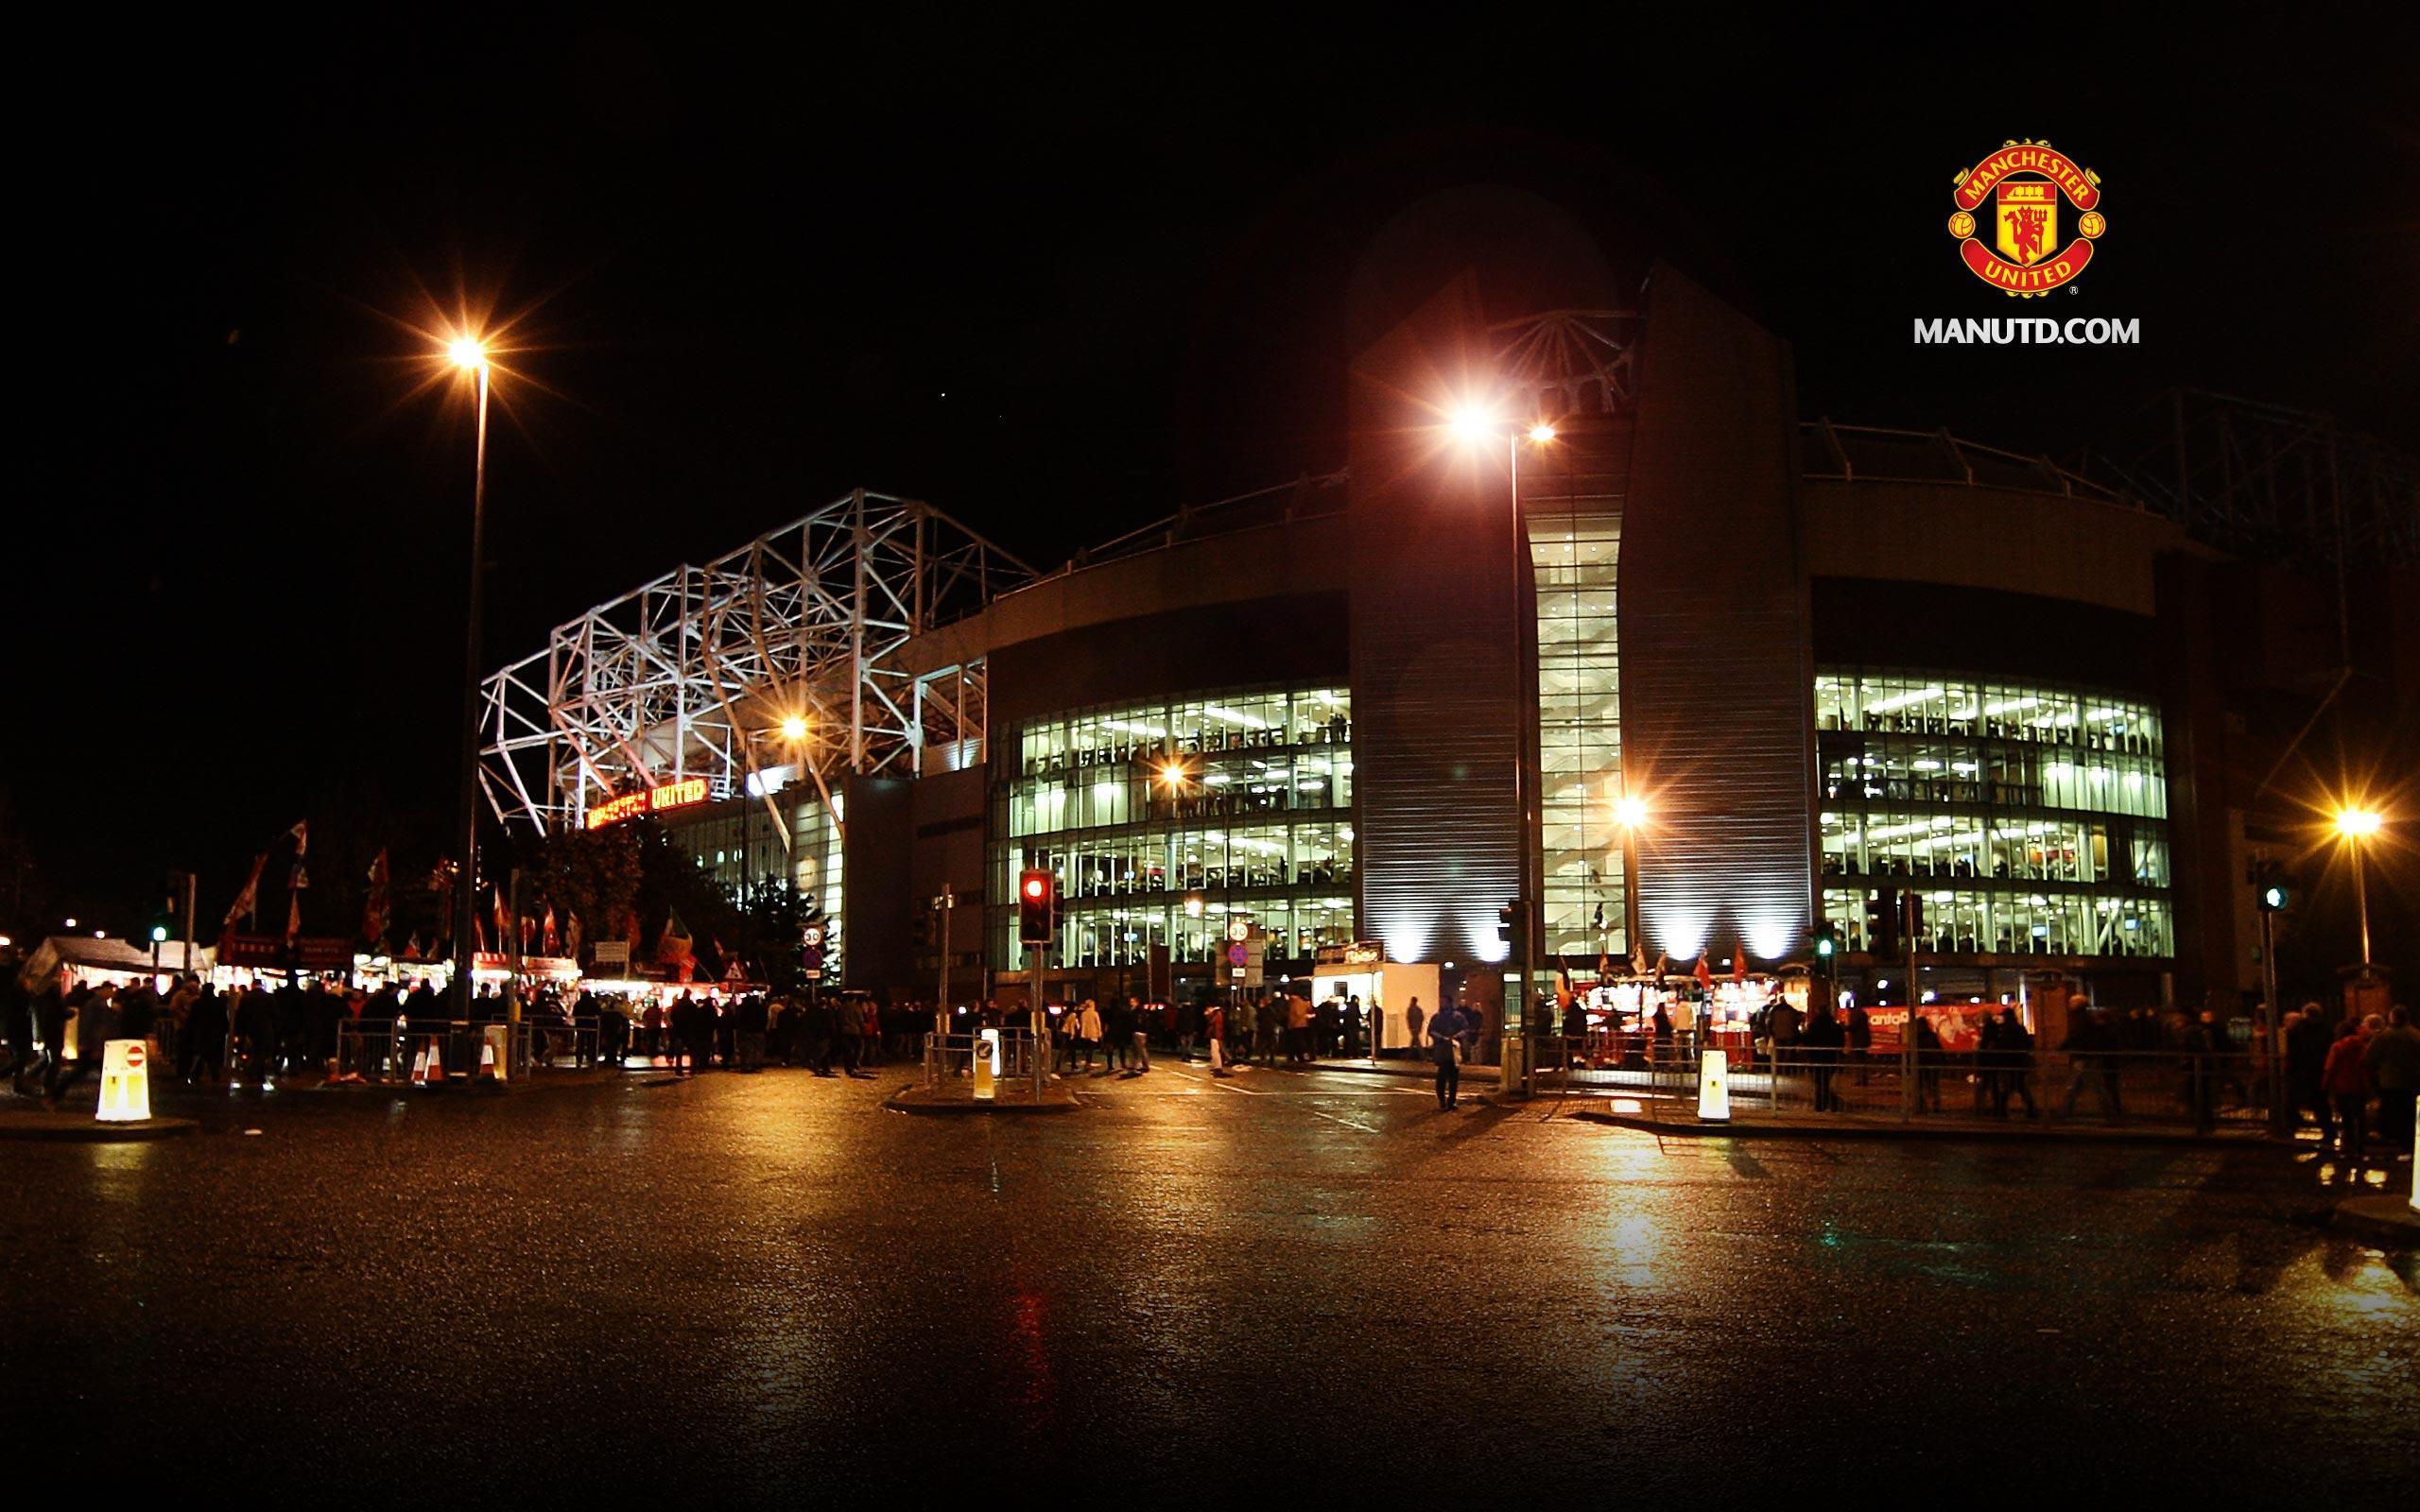 Manchester United Old Trafford Free 352x416 Wallpaper Download